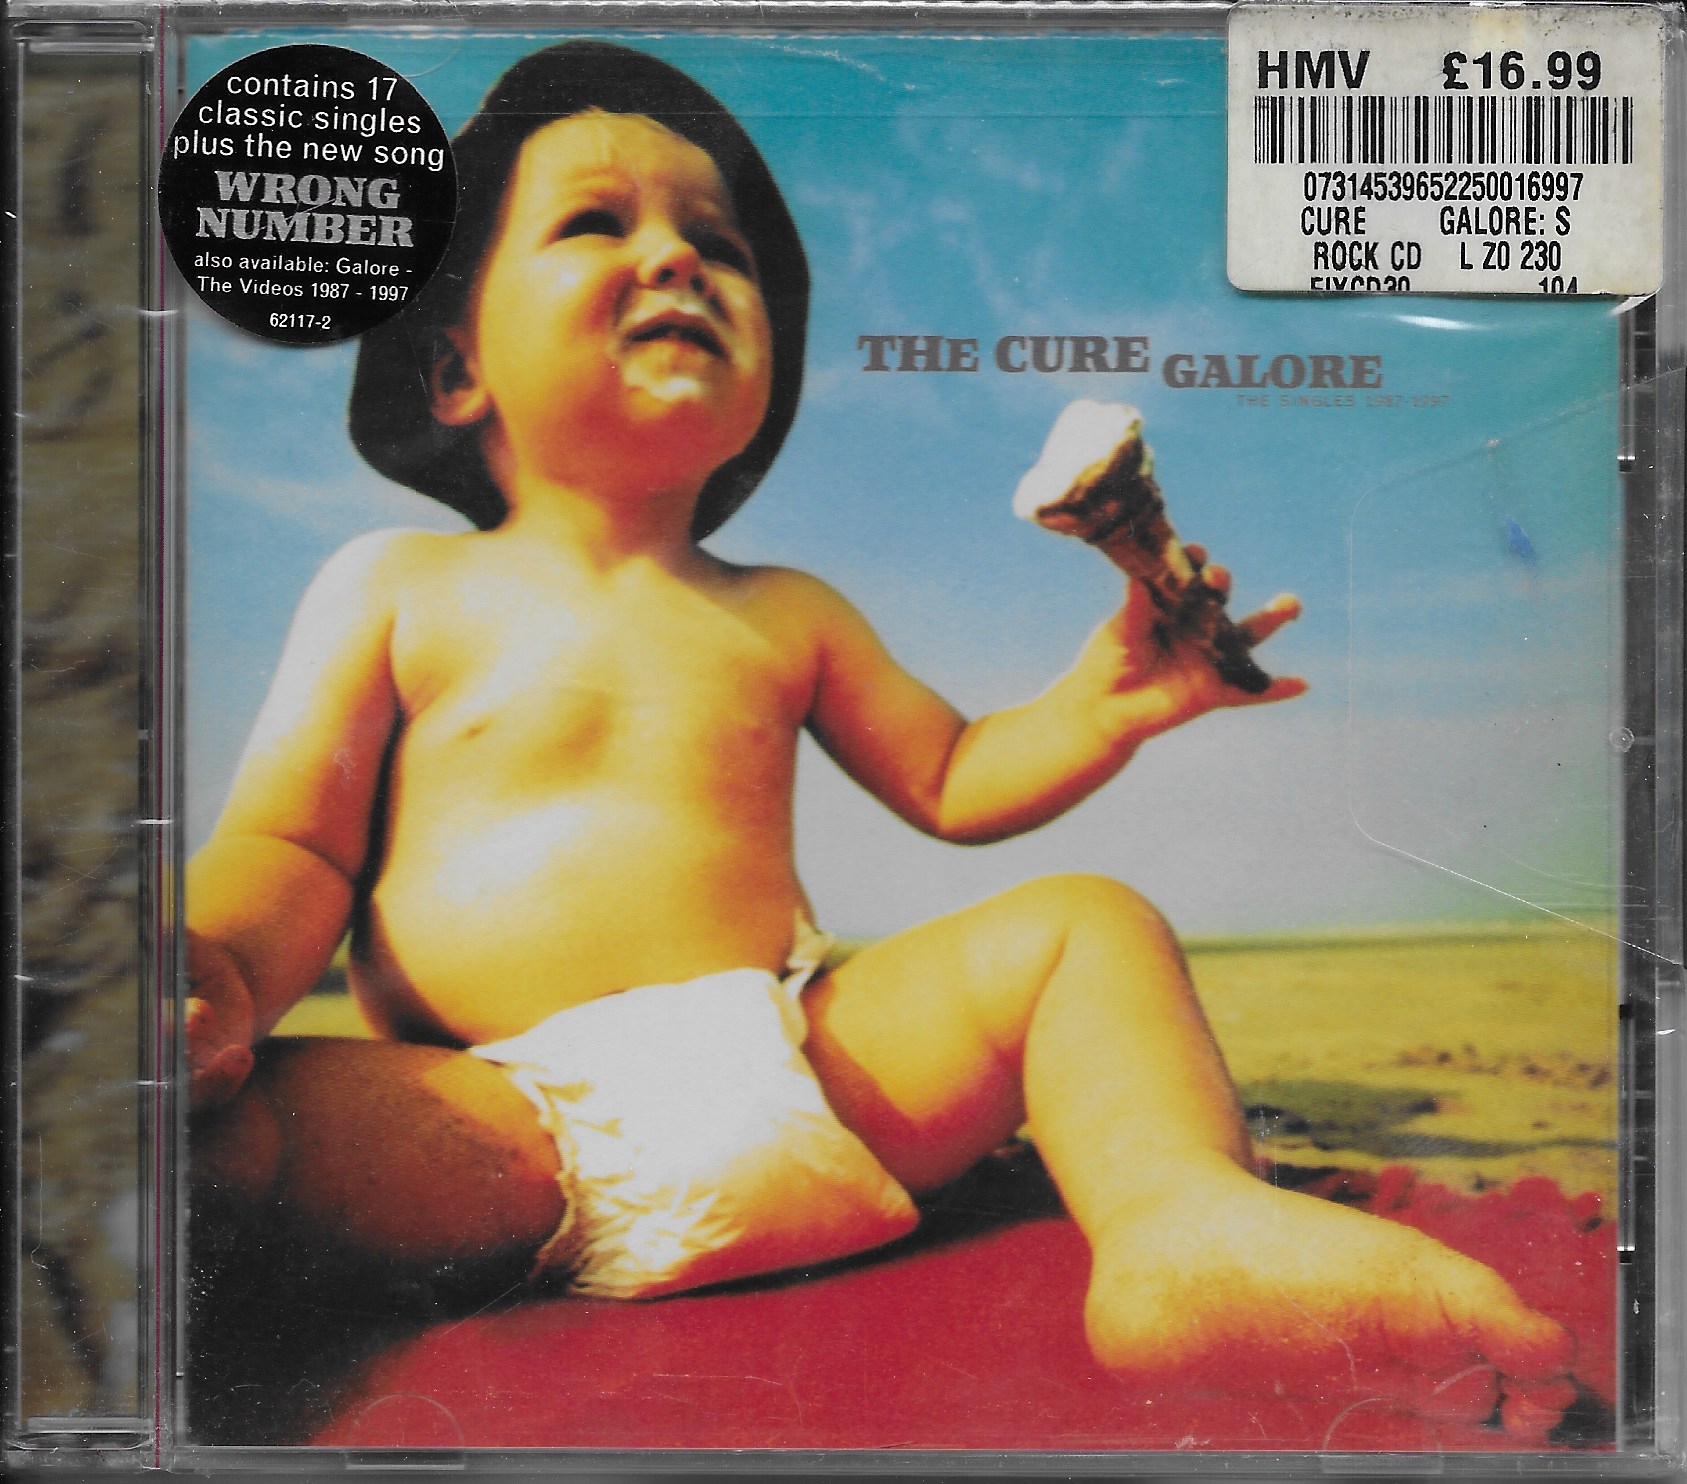 Picture of 62117 - 2 Galore - US import by artist The Cure